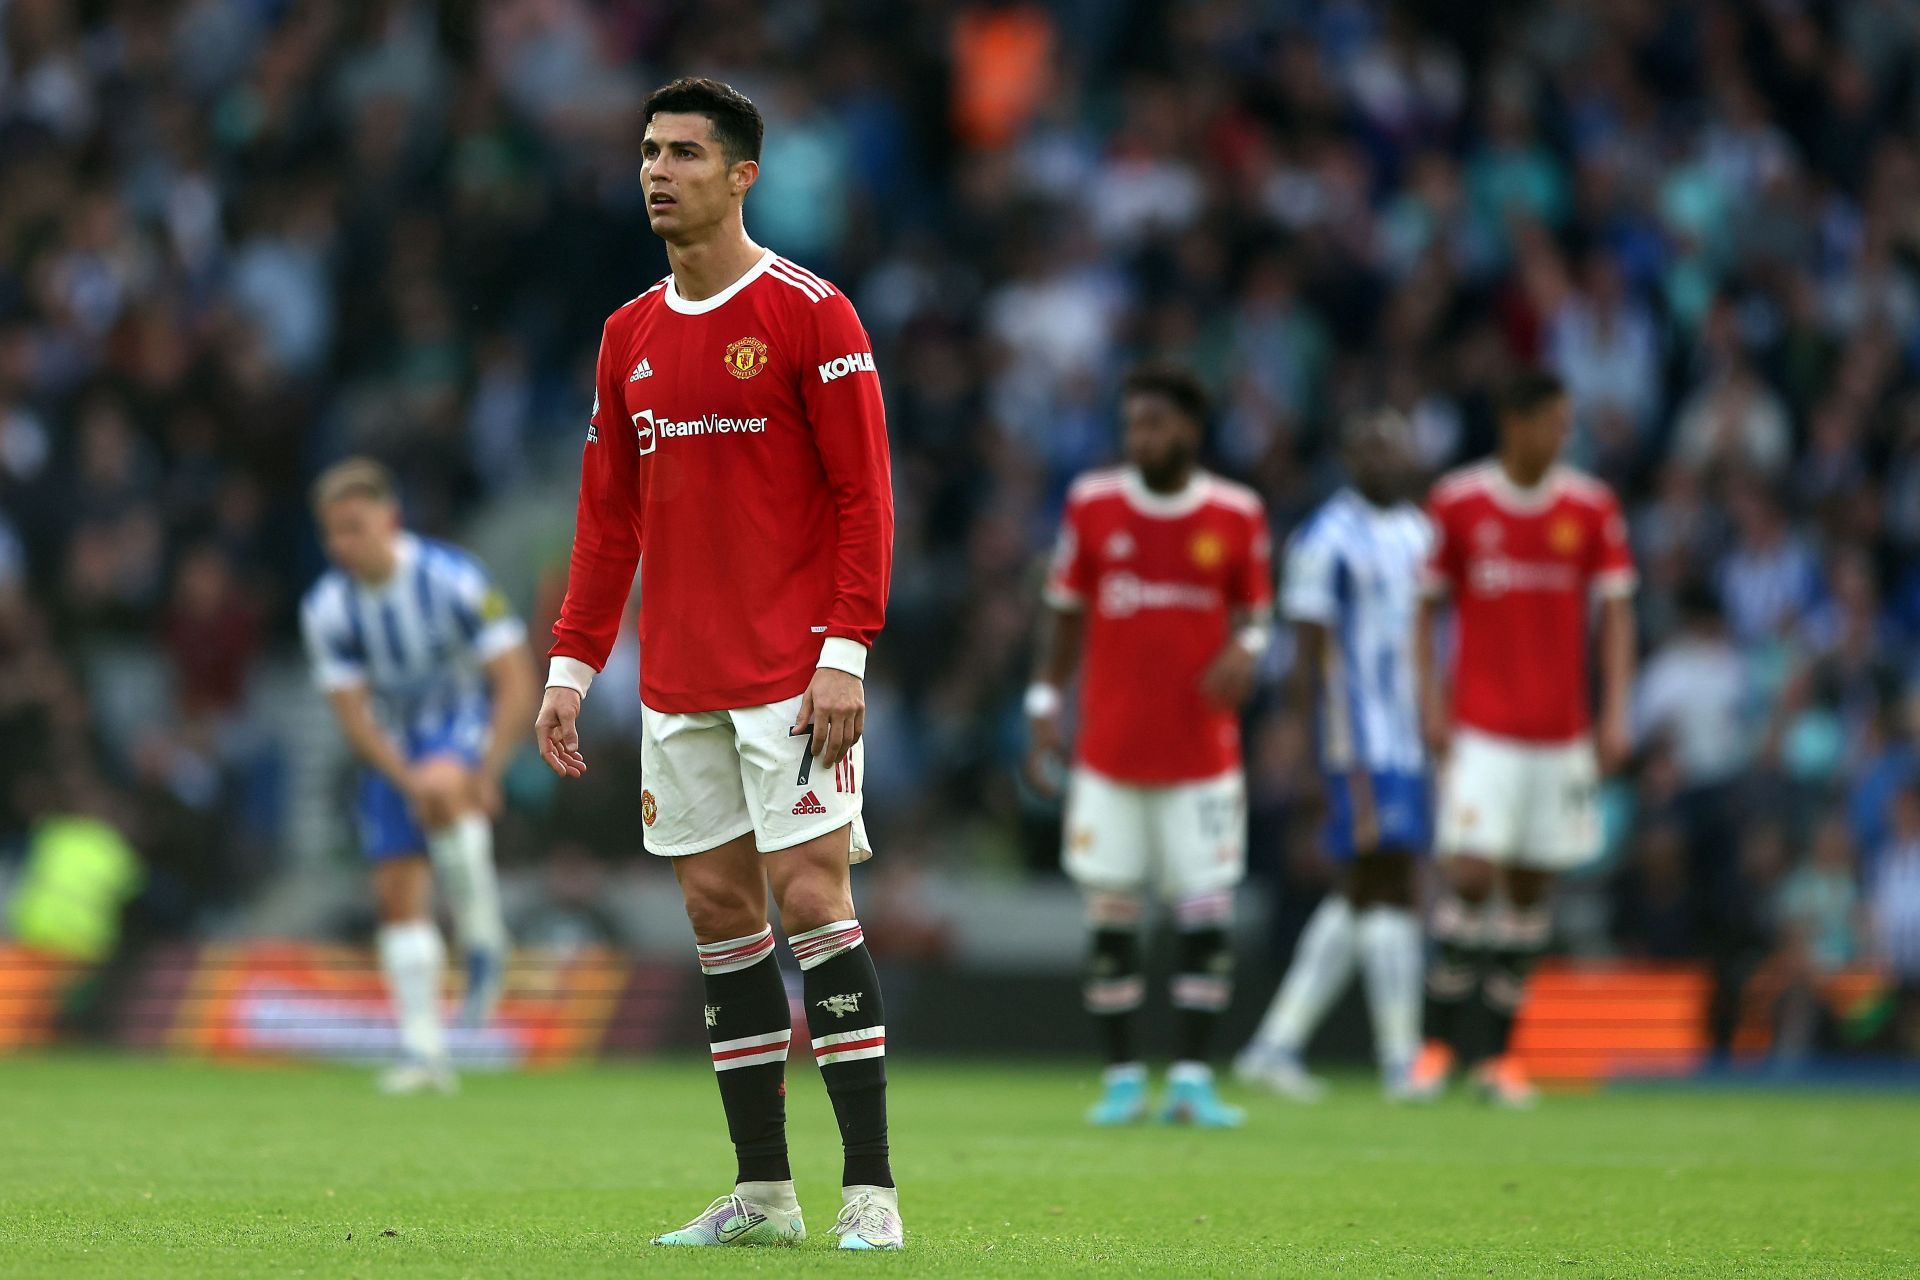 A major overhaul awaits the Manchester United squad after what has been a dismal season